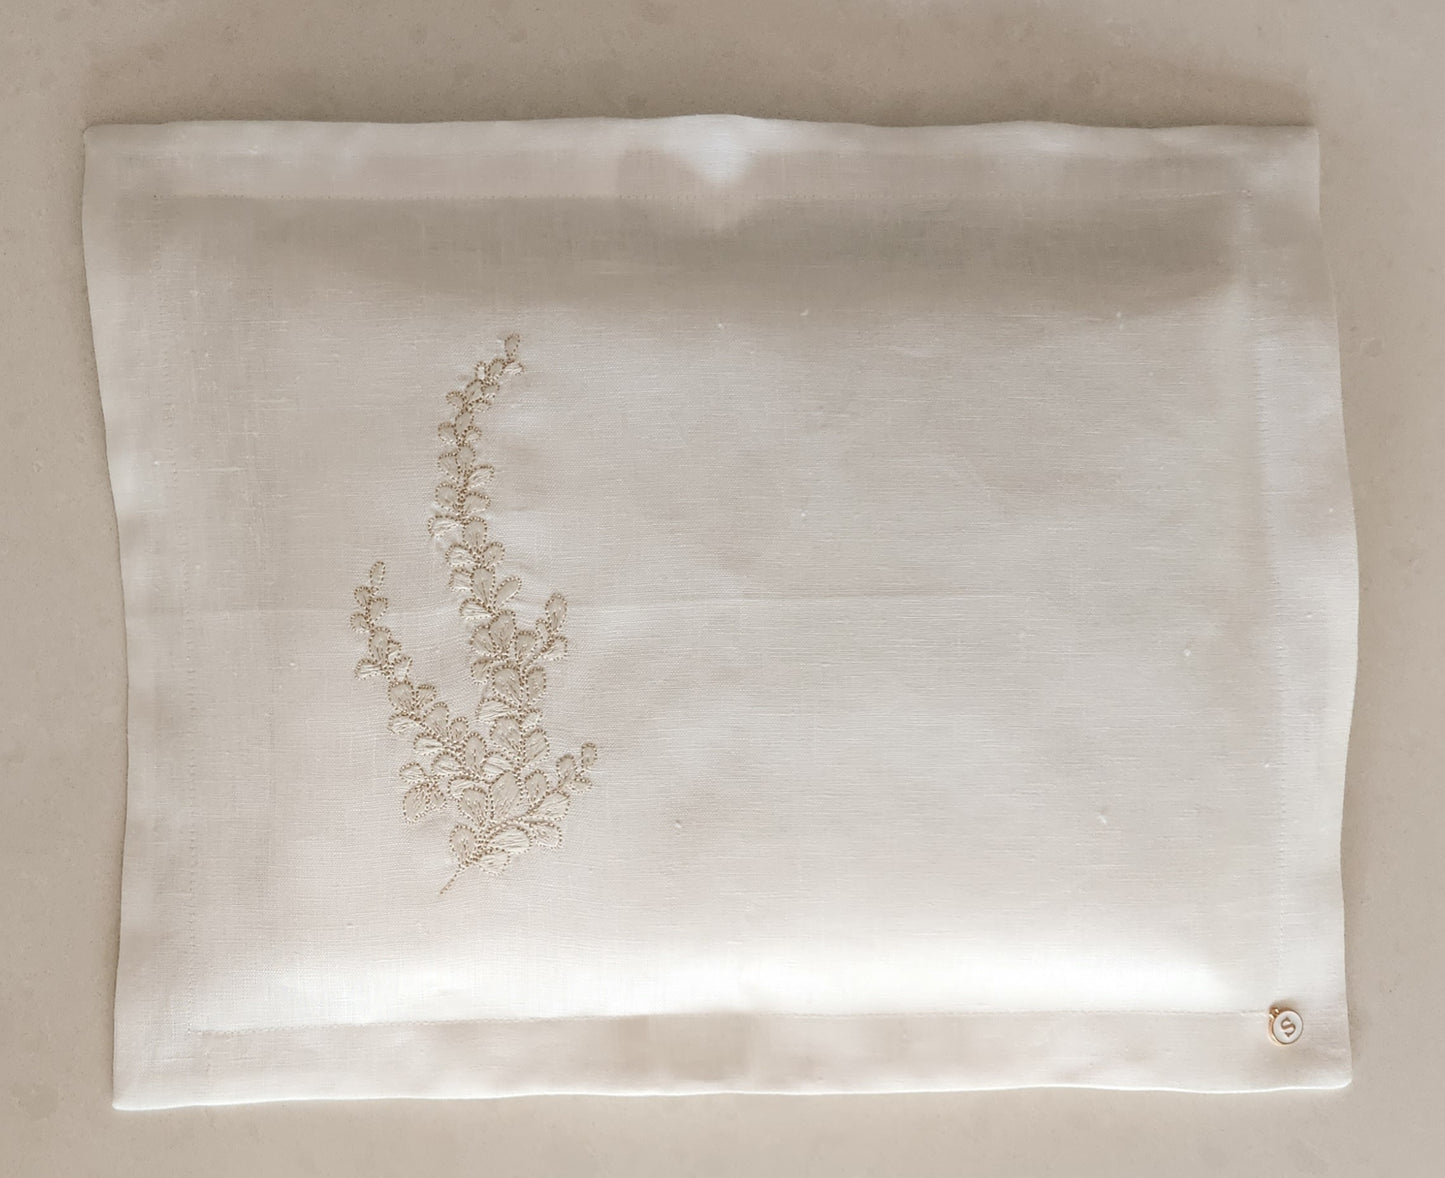 Exclusive Baby Wrap & Pillowcase Set,  Ivory Linen with Ivory/Natural embroidered vine